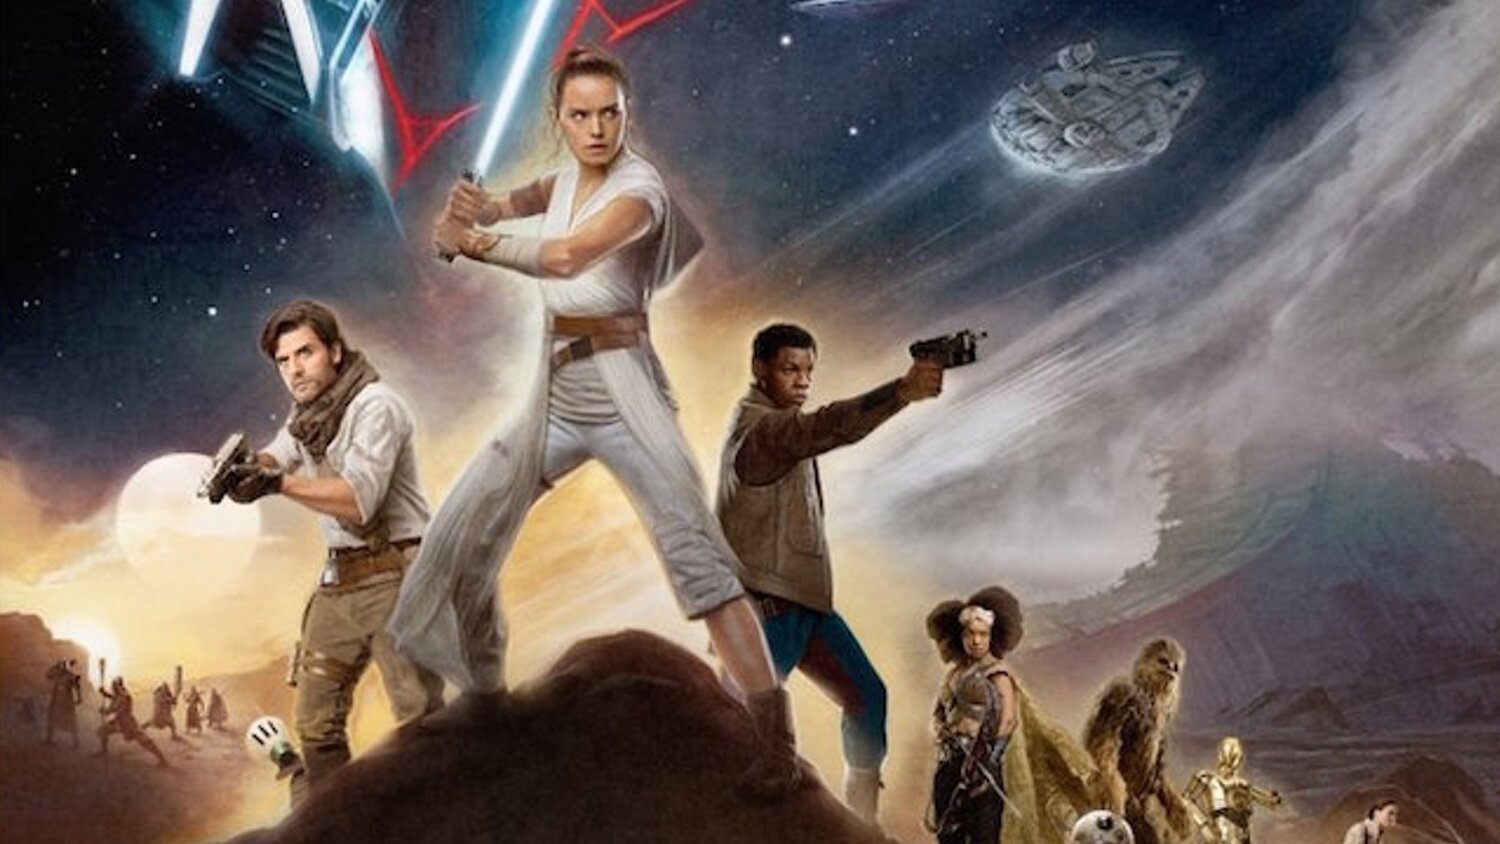 Fraude Intact Aftrekken Awesome and Beautiful New STAR WARS: THE RISE OF SKYWALKER Posters Released  — GeekTyrant